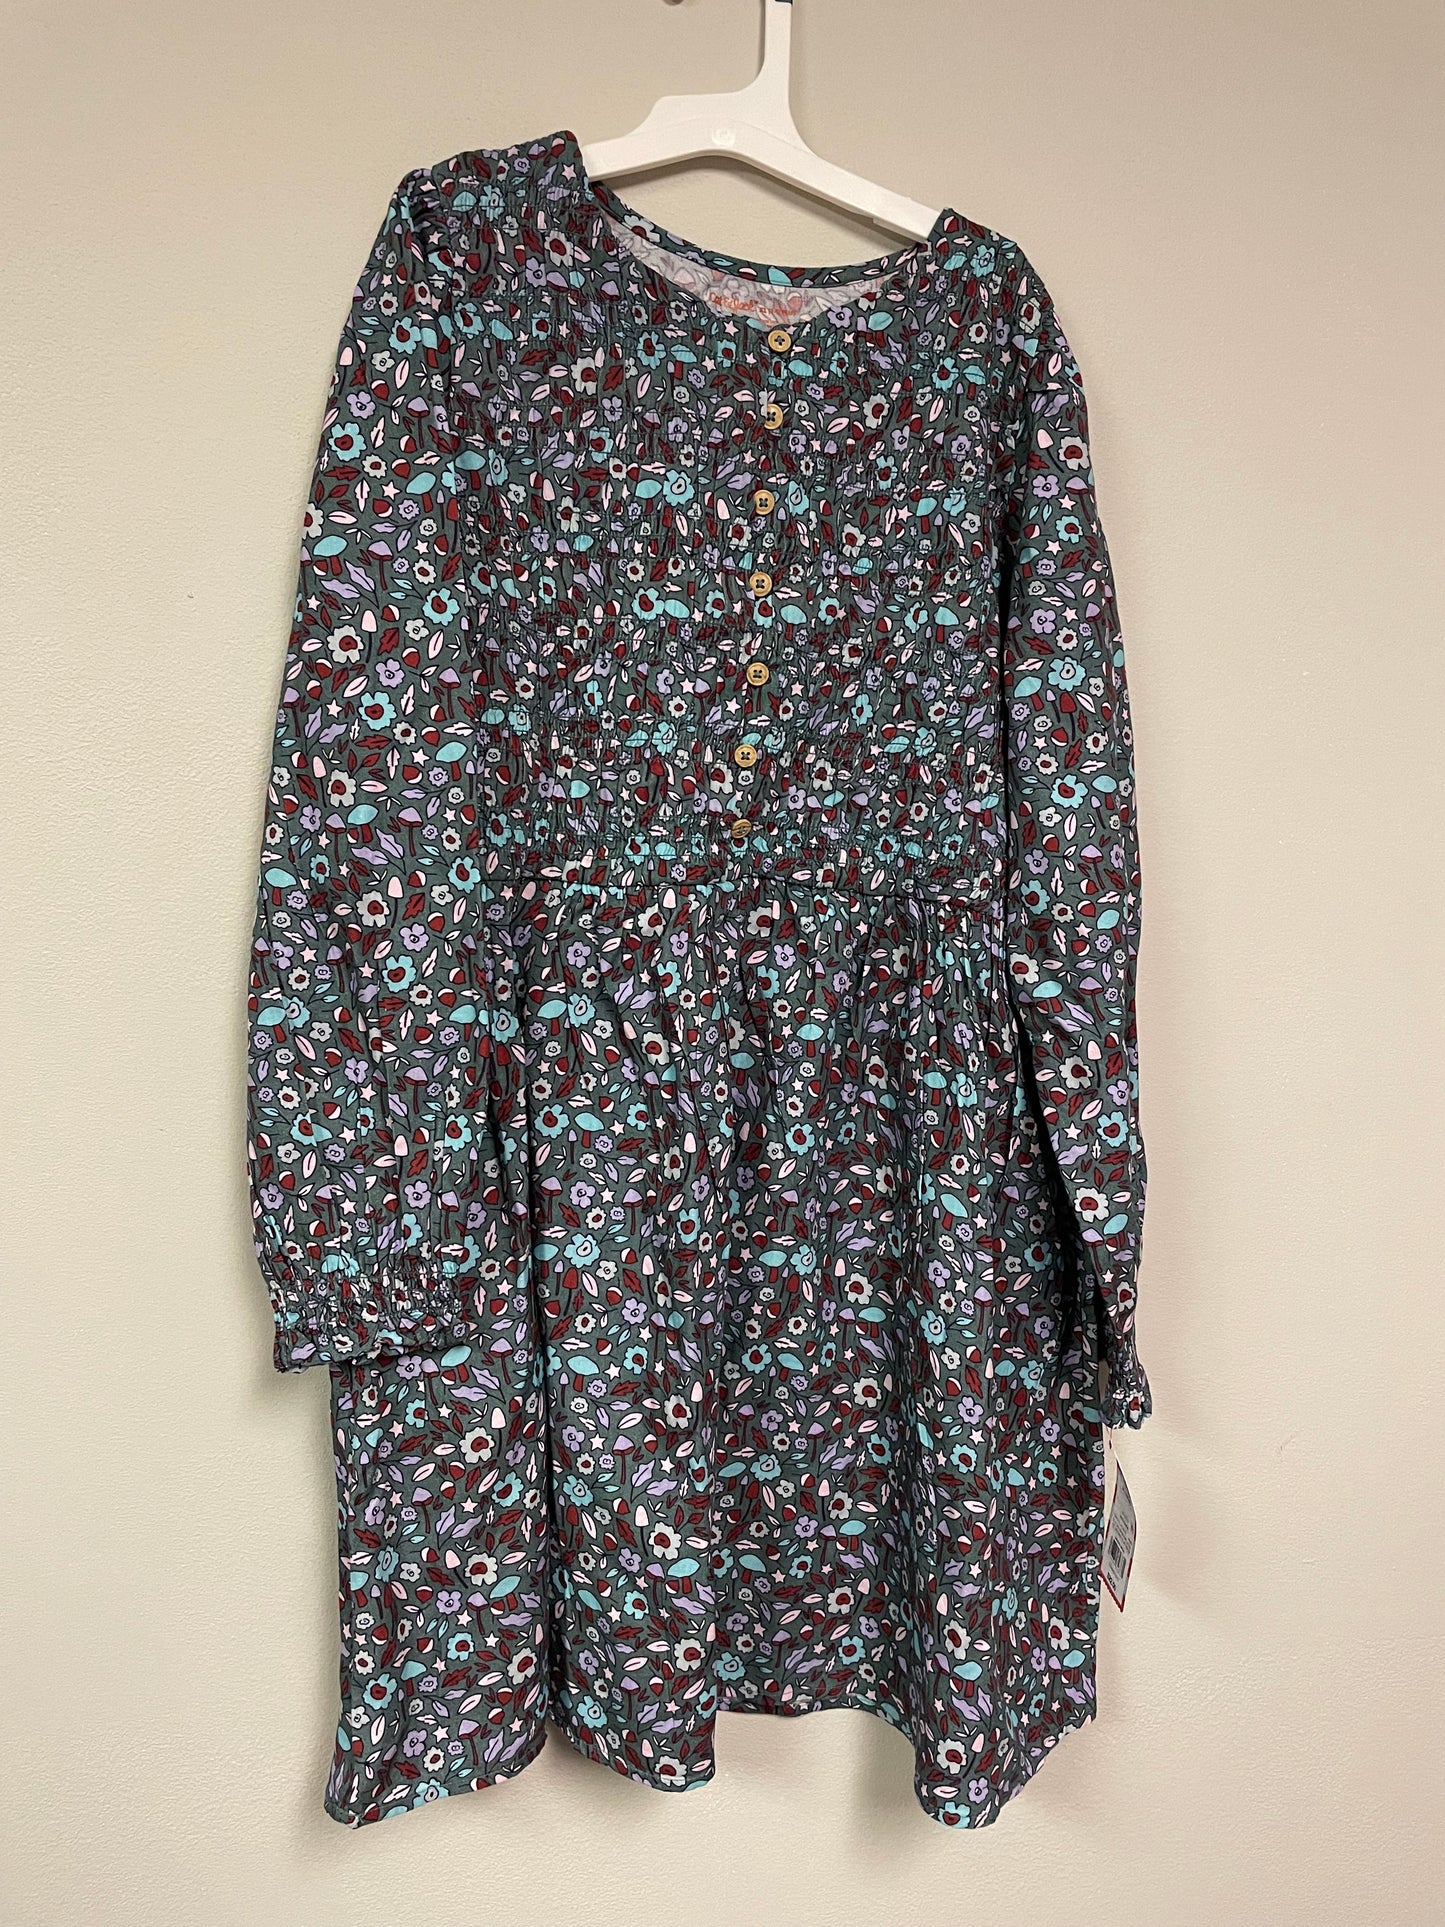 New girl XL (14) plus cat and jack long sleeve dress